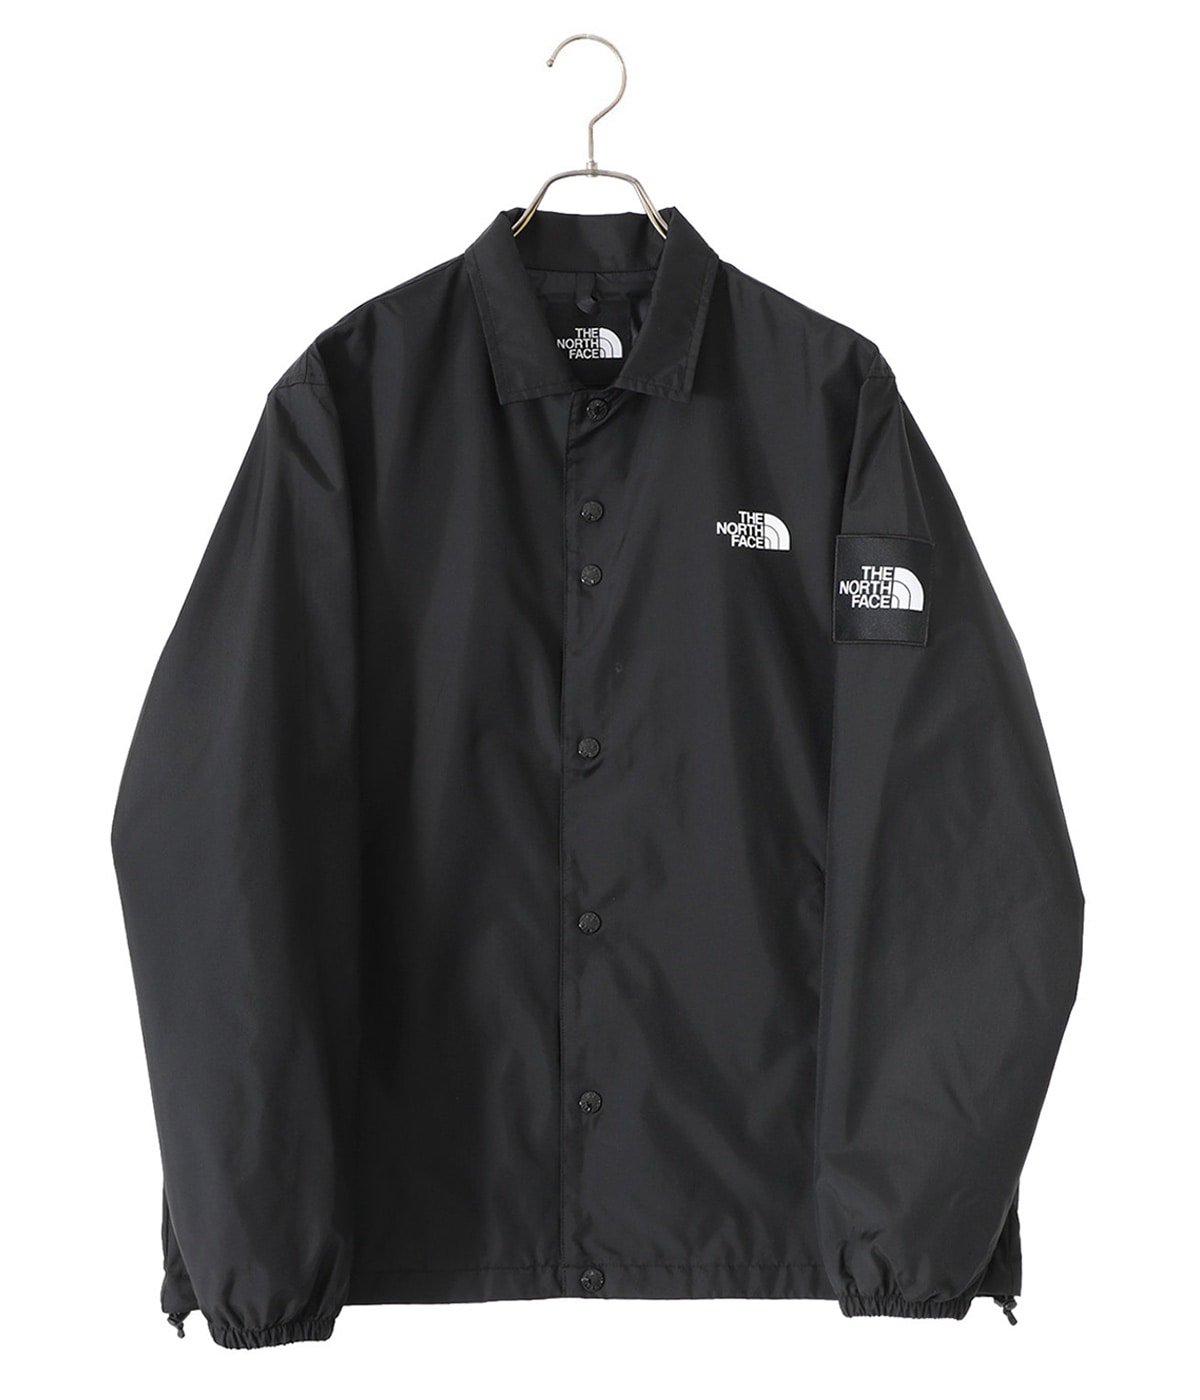 The Coach Jacket | THE NORTH FACE(ザ ノースフェイス) / アウター 